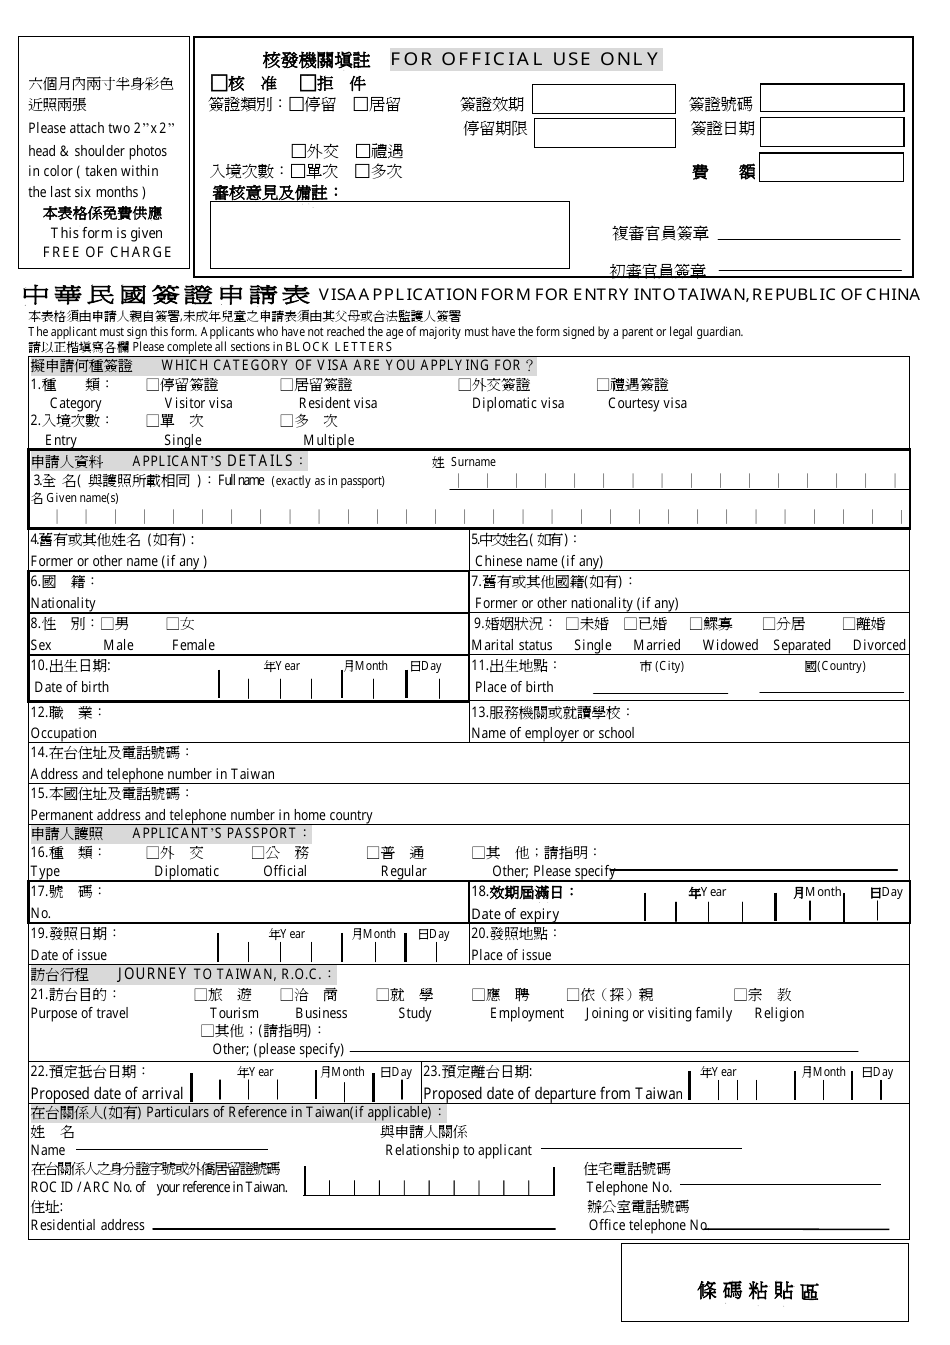 Visa Application Form for Entry Into Taiwan - China, Page 1